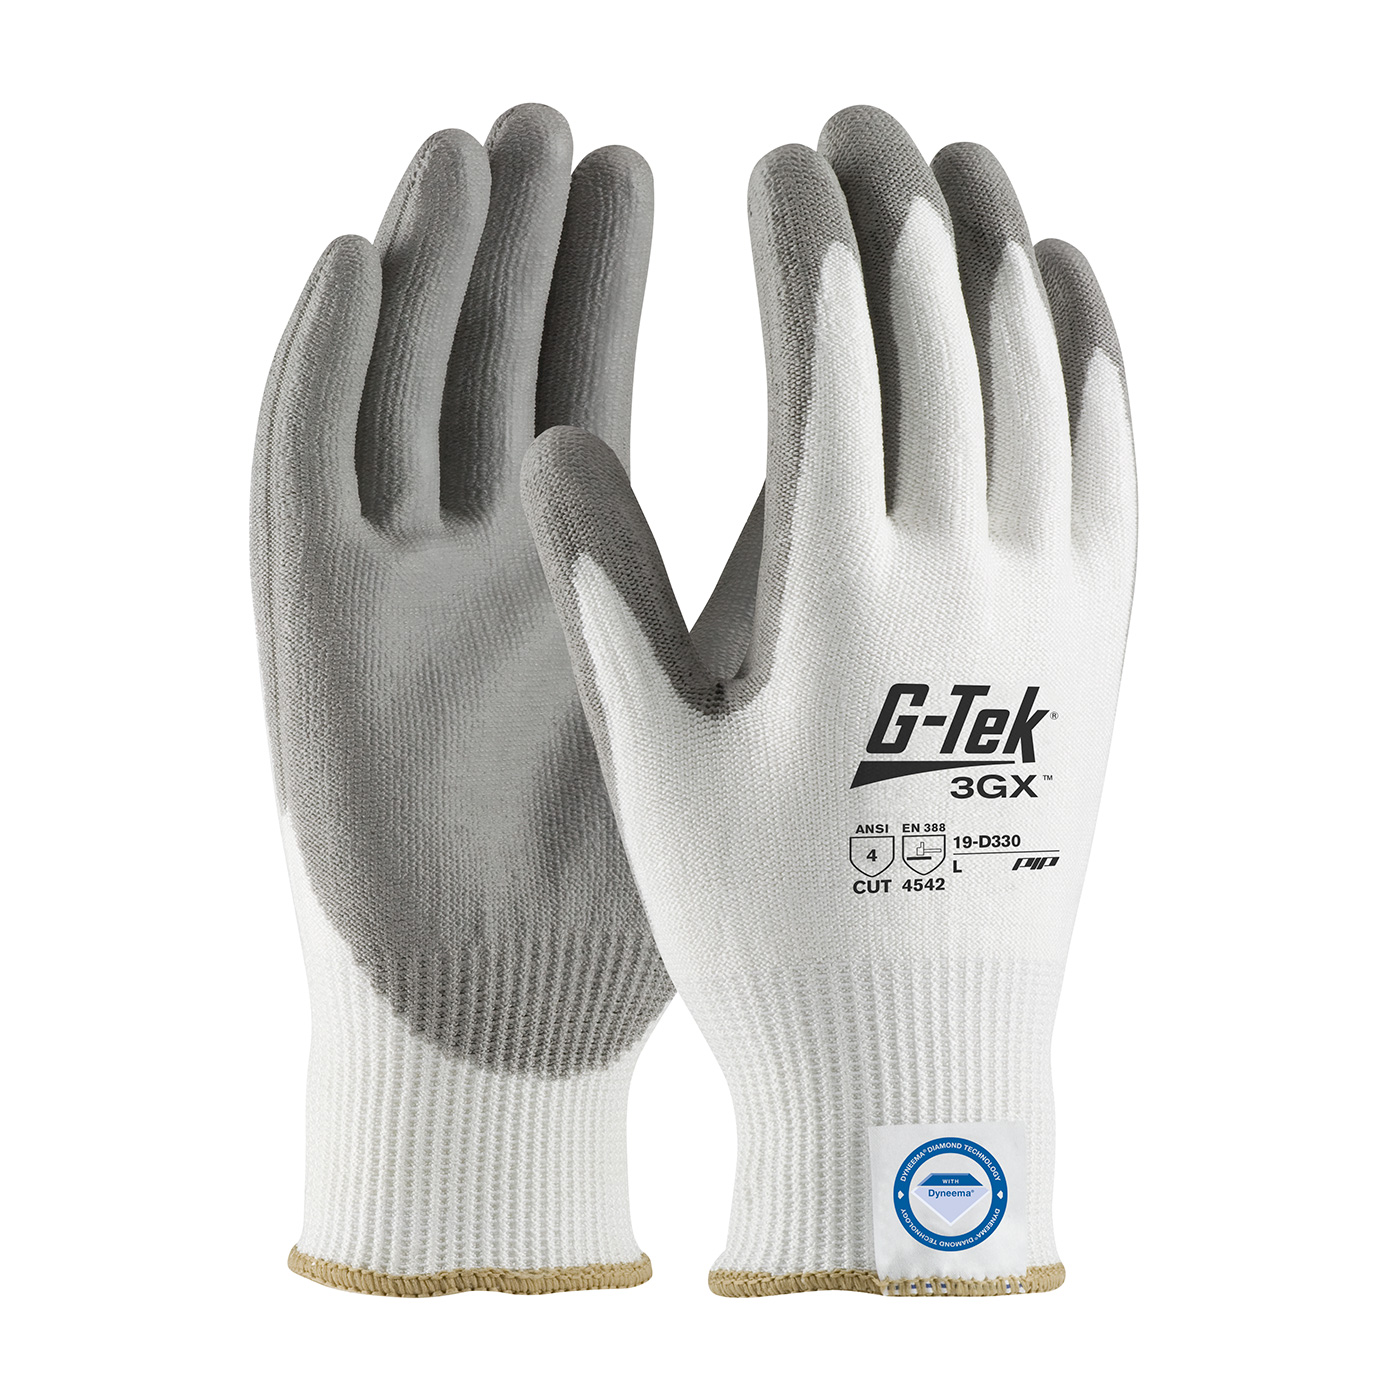 PIP 19-D330/XL G-Tek 3GX Seamless Knit Dyneema Diamond Blended Glove with Polyurethane Coated Smooth Grip on Palm & Fingers - X-Large PID-19 D330 XL